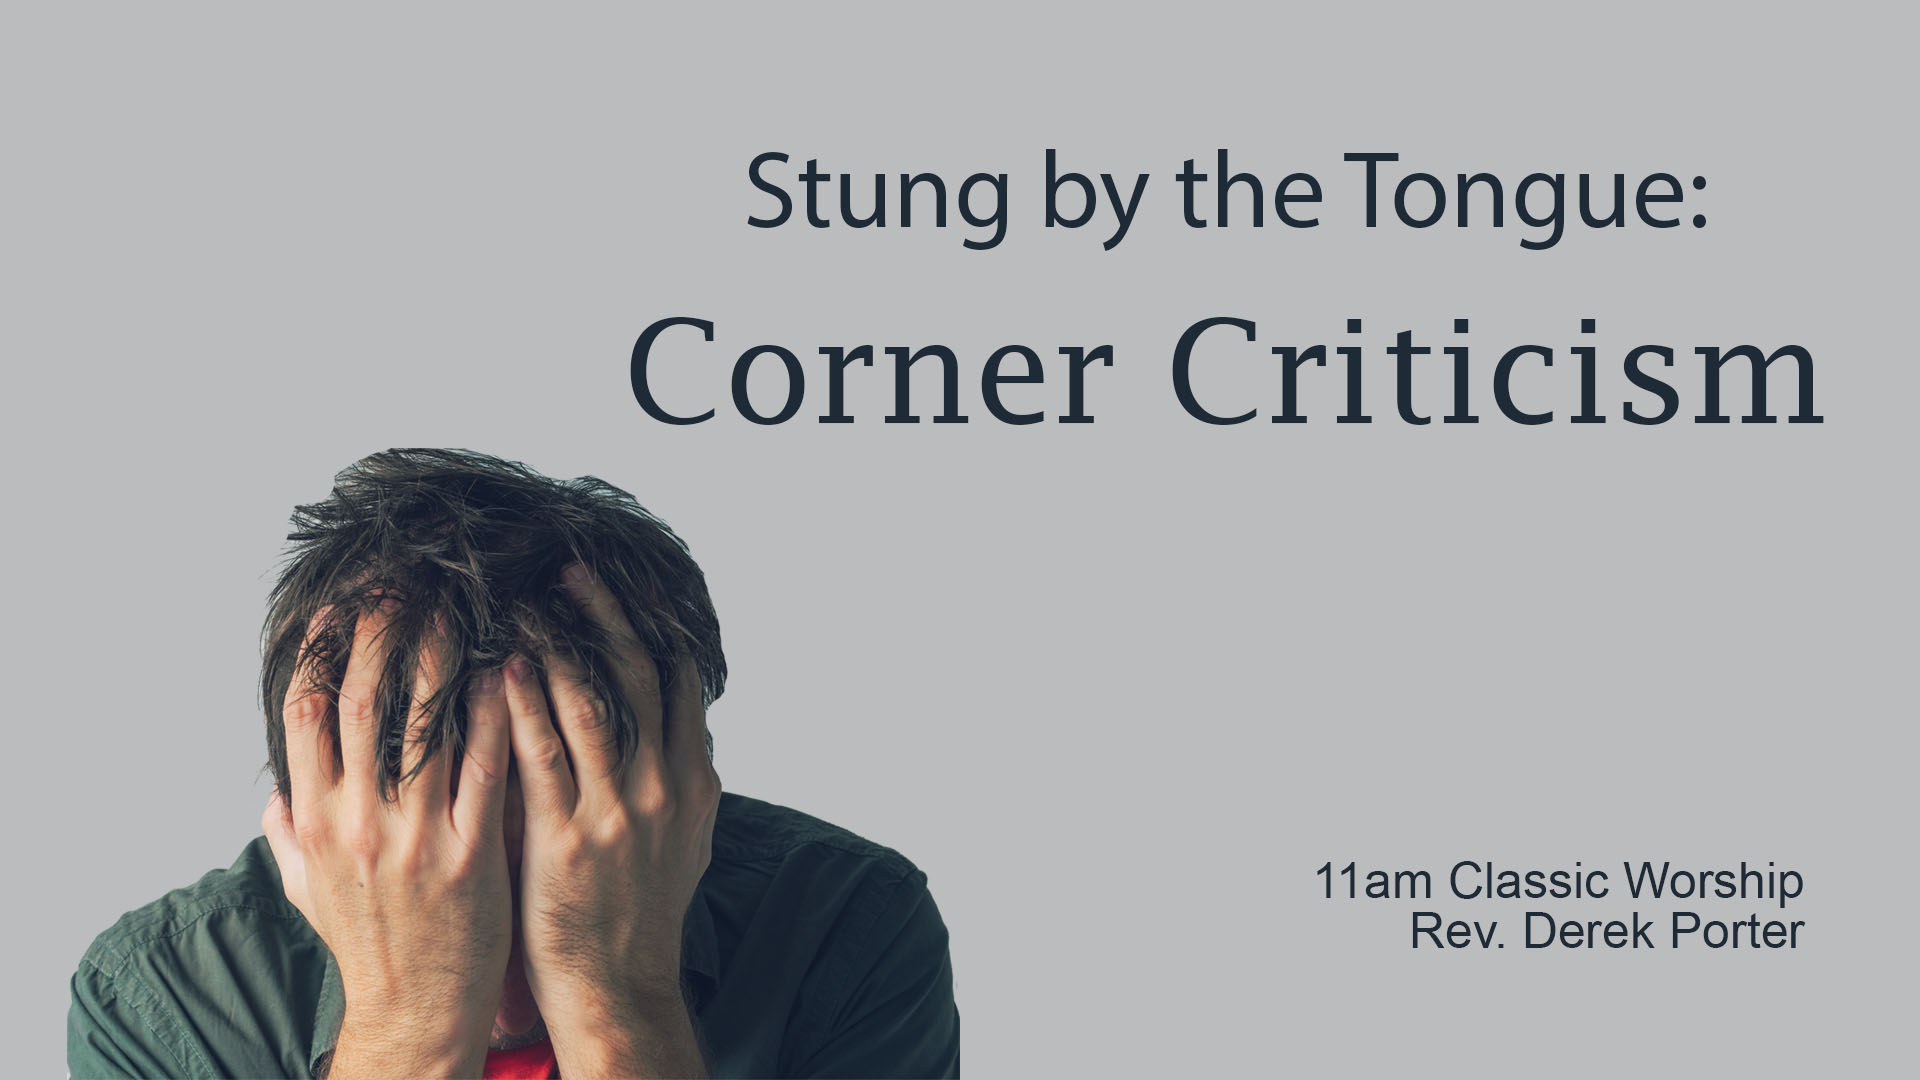 Stung by the Tongue: Corner Criticism